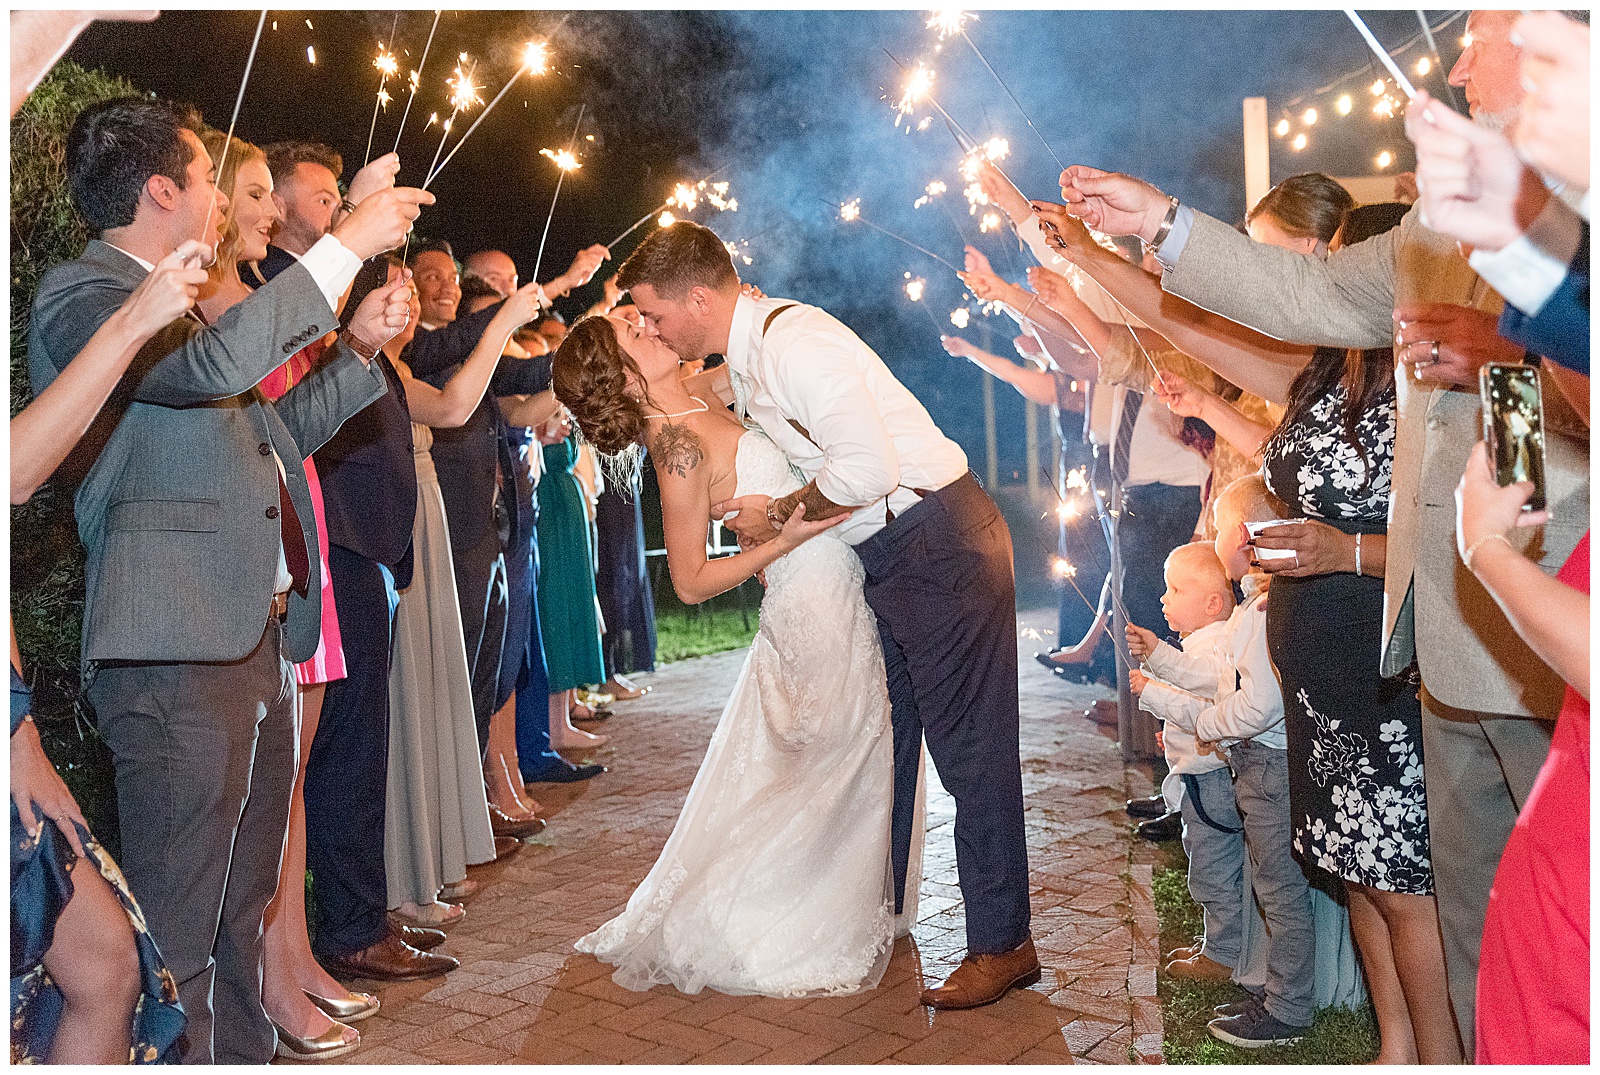 groom dipping bride back as they kiss leaving reception surrounded by guests holding sparklers at lauxmont farms in york pennsylvania